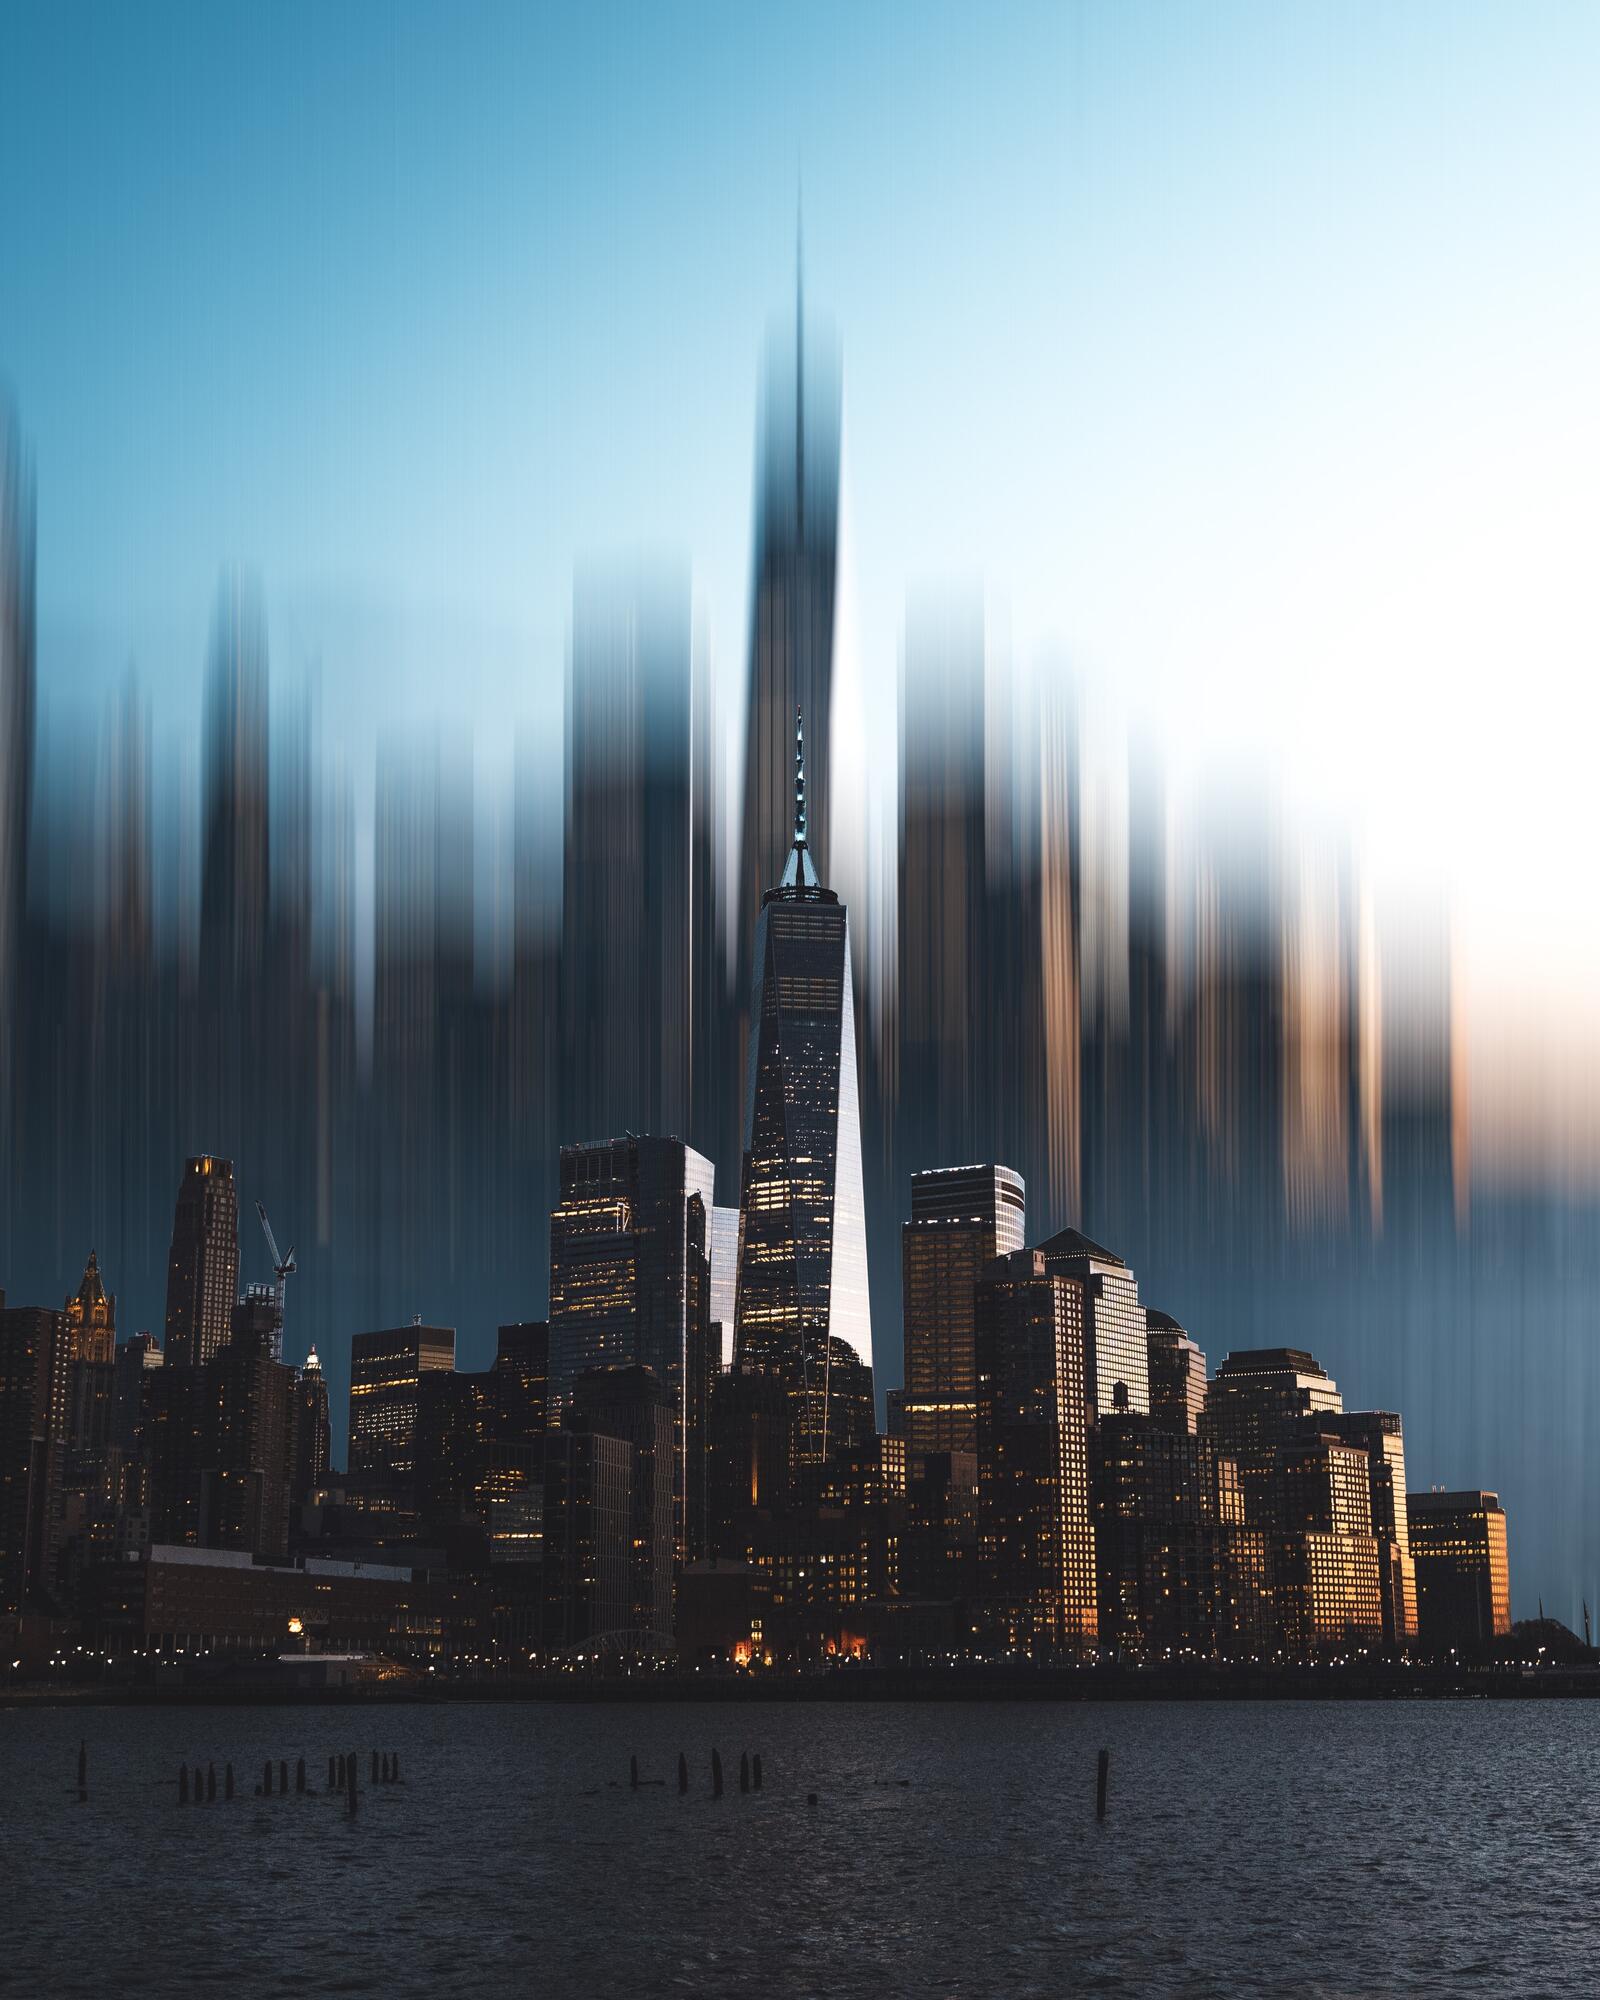 Wallpapers wallpaper skyscrapers photoshop illusion on the desktop